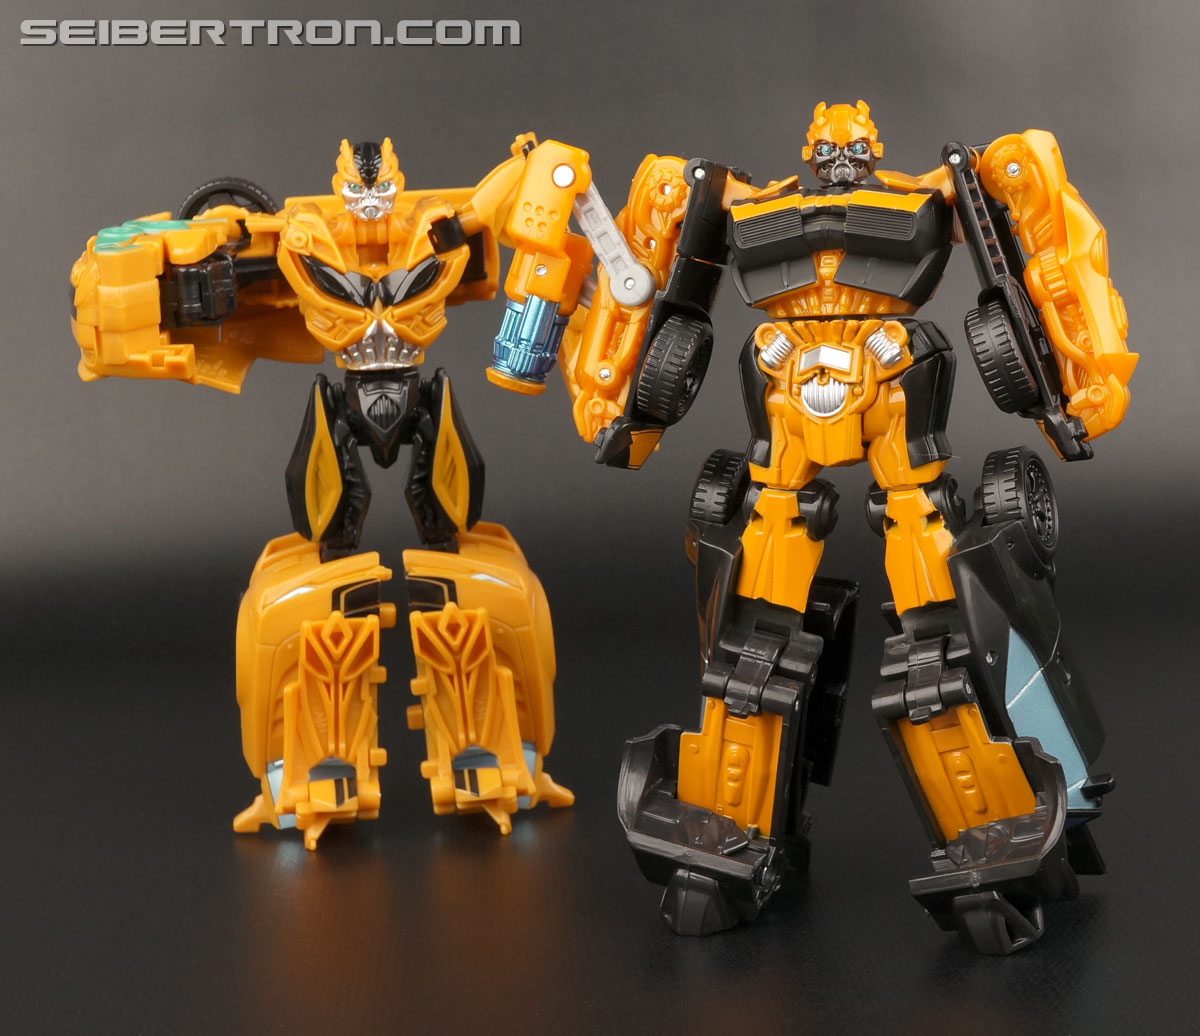 Transformers Age of Extinction: Robots In Disguise High Octane Bumblebee (Image #96 of 98)